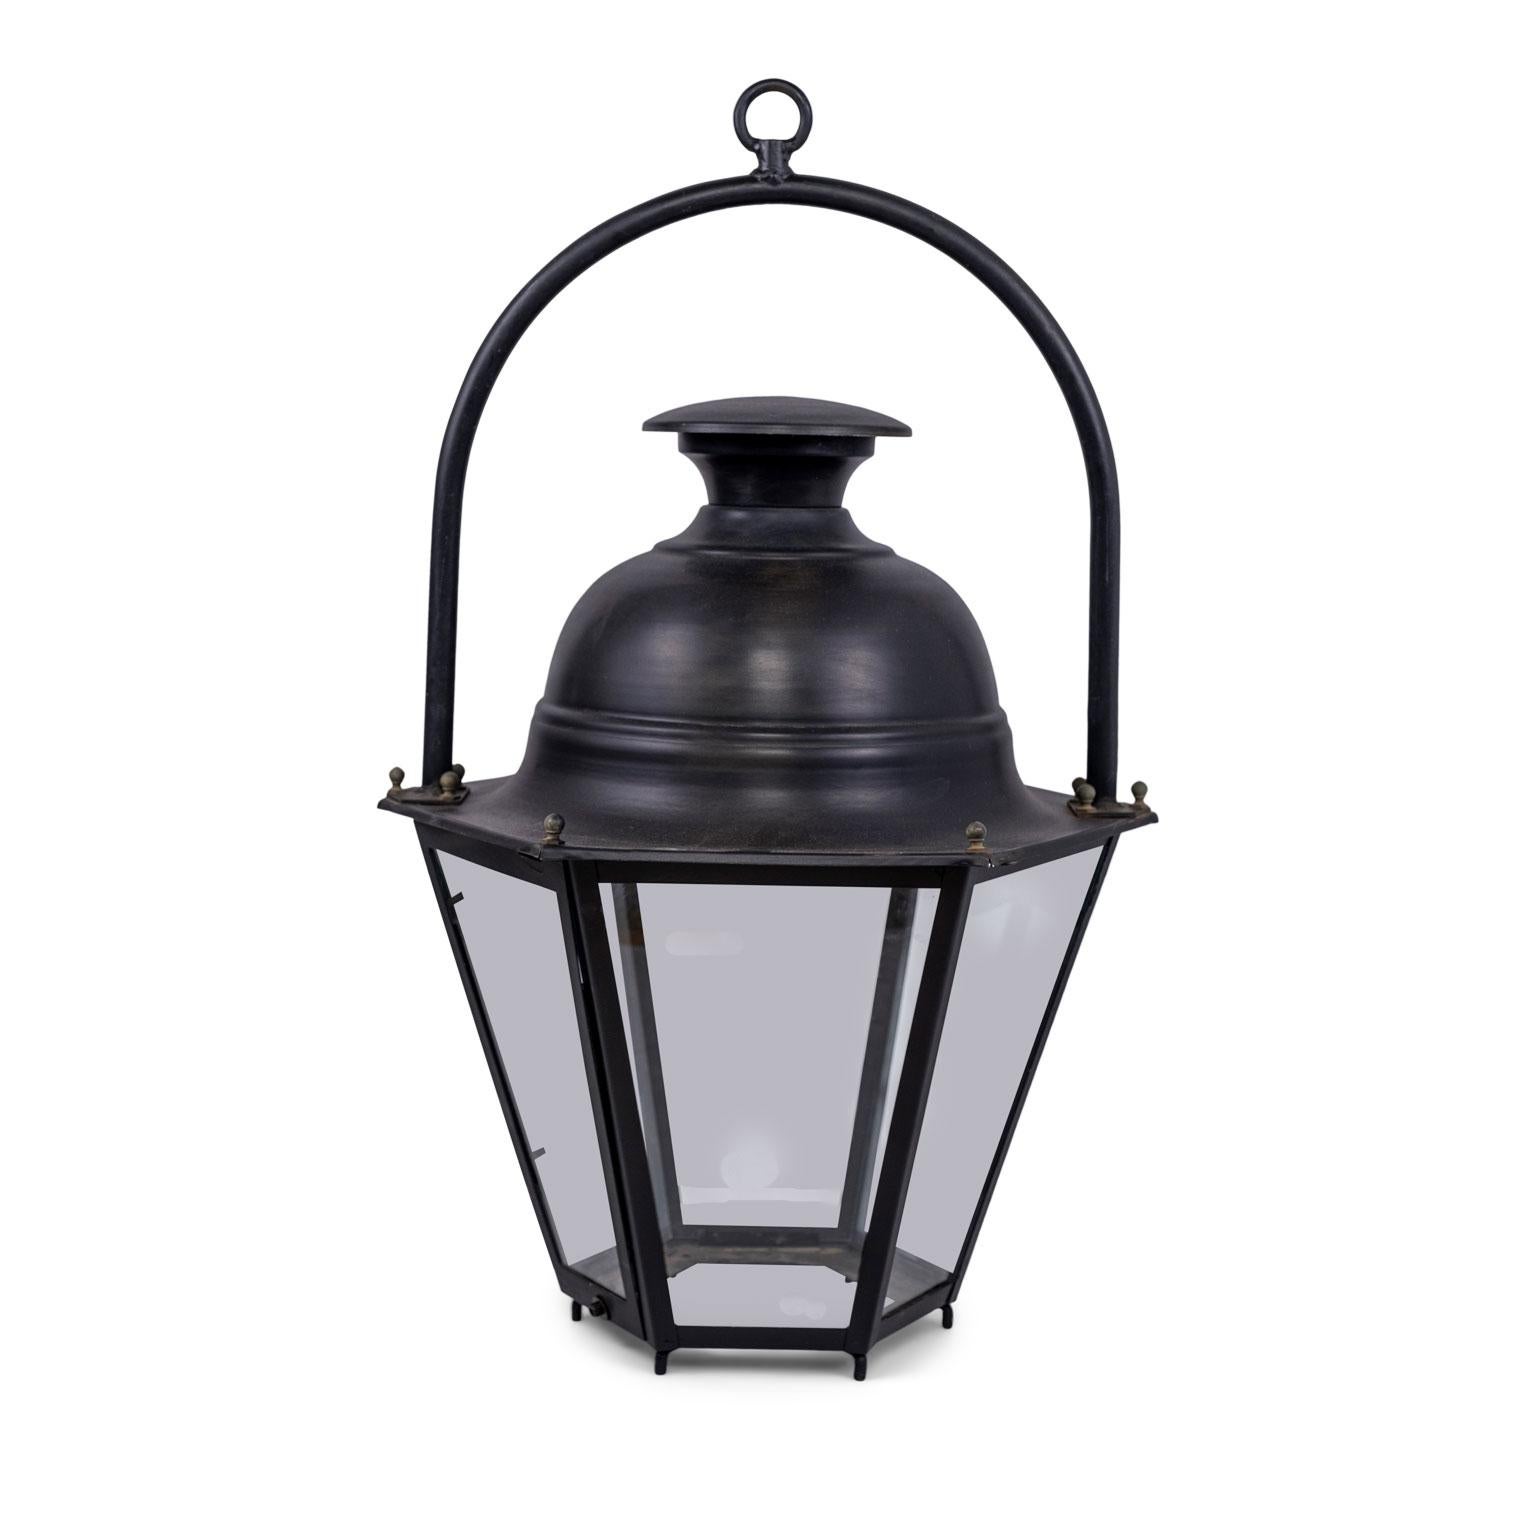 Six vintage black-painted hexagonal street lanterns from the South of France. Sold unwired, but may be wired for electricity or fitted for use with gas for an additional cost. Lanterns sold individually and priced $3,800 each.